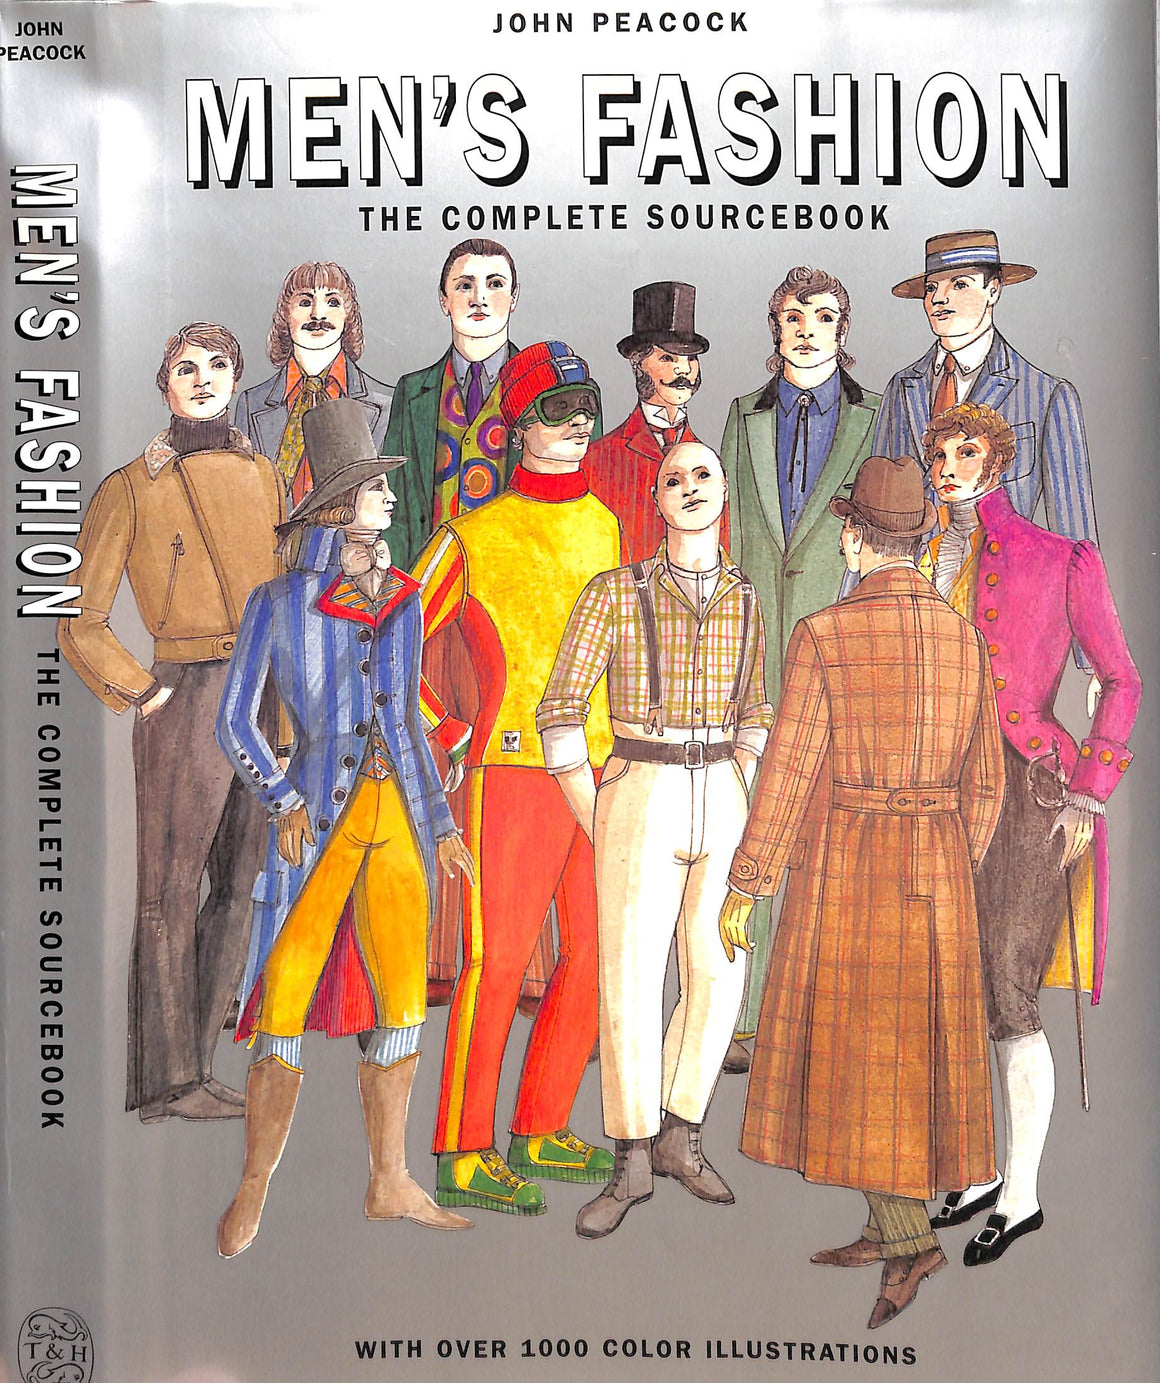 "Men's Fashion: The Complete Sourcebook" 1996 PEACOCK, John